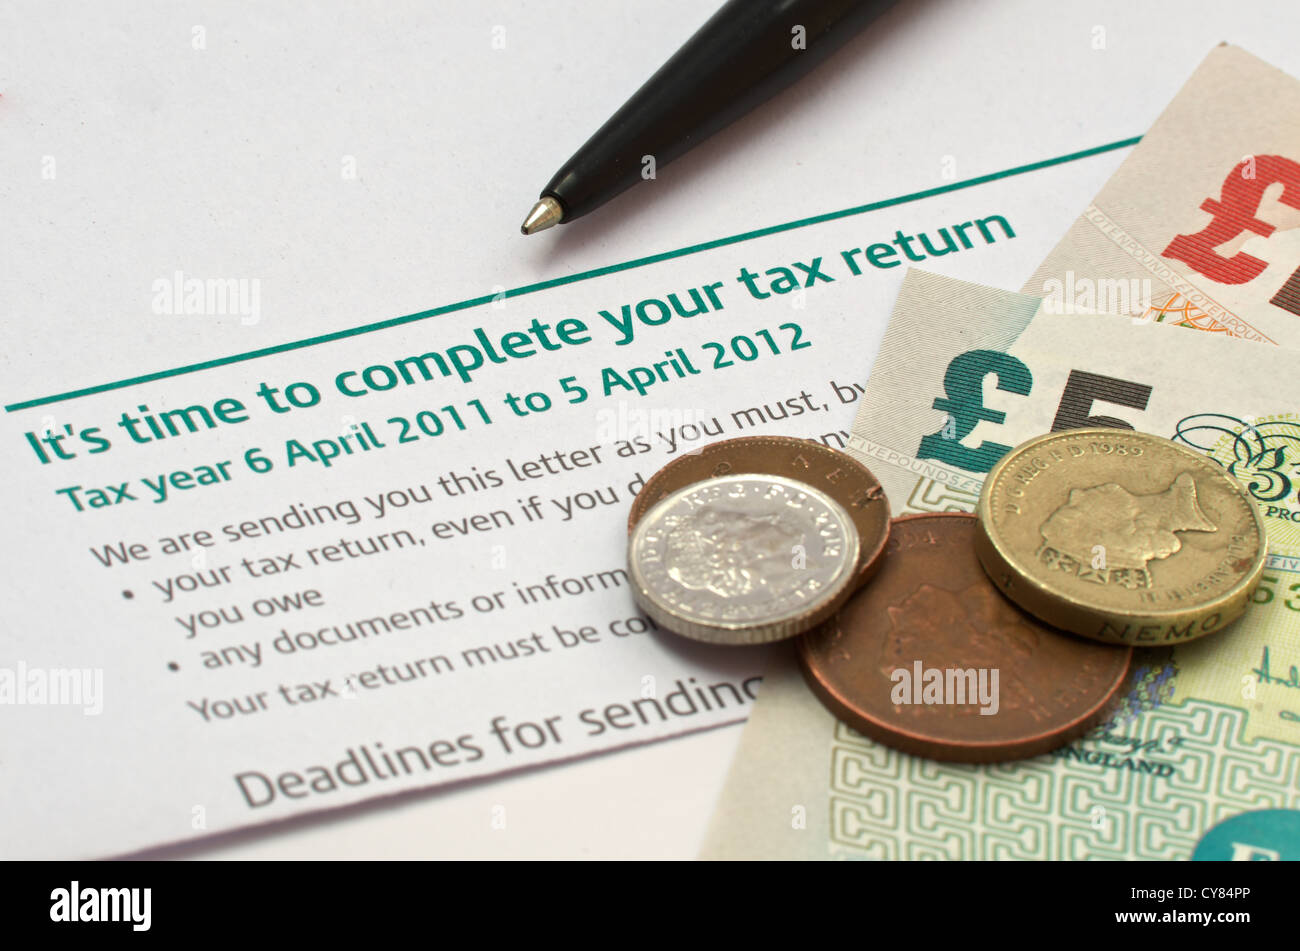 Reminder Letter that it is time to complete a tax return. On the letter is a pen and british Sterling currency Stock Photo